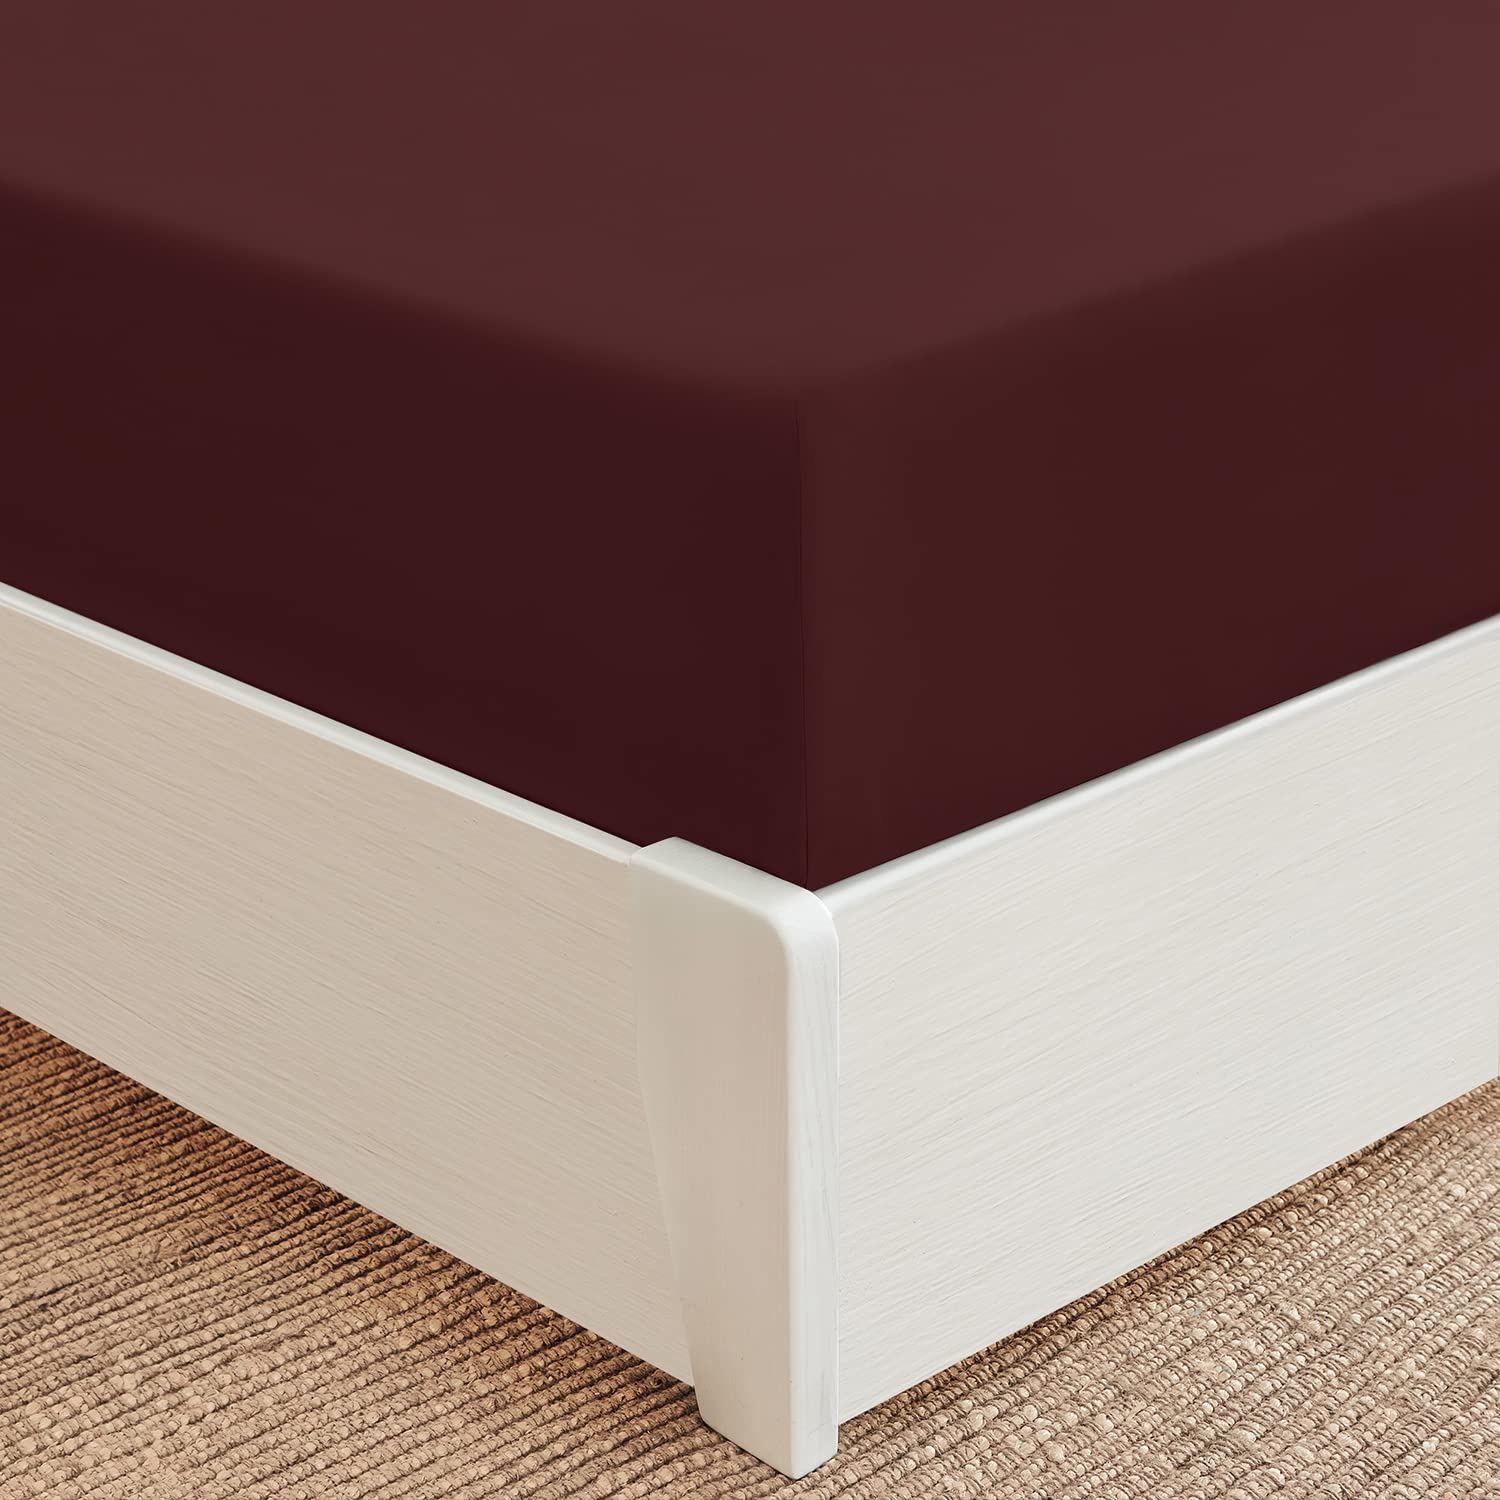 Book Cover Mellanni Fitted Sheet King Burgundy - Brushed Microfiber 1800 Bedding - Wrinkle, Fade, Stain Resistant - Deep Pocket - 1 Single Fitted Sheet Only (King, Burgundy)